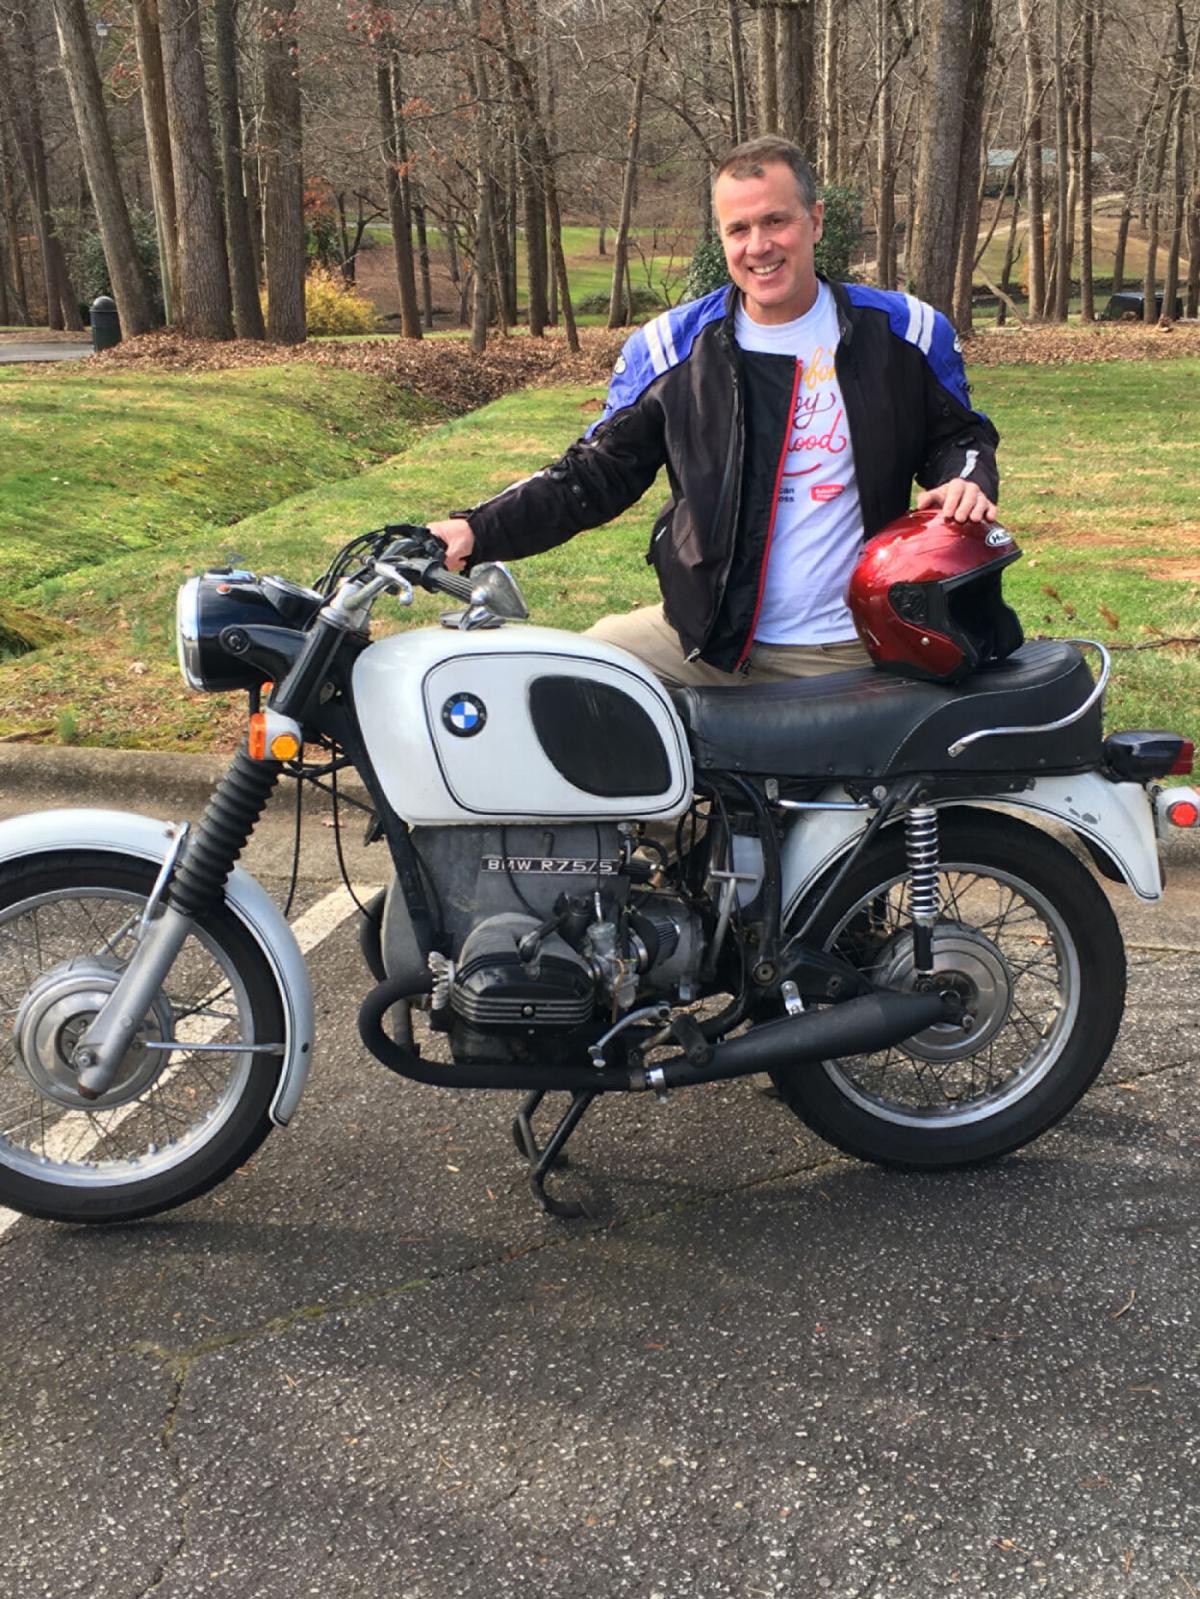 My Classic Motorcycle Martin O Connell S 1971 Bmw R75 5 Local News Statesville Com